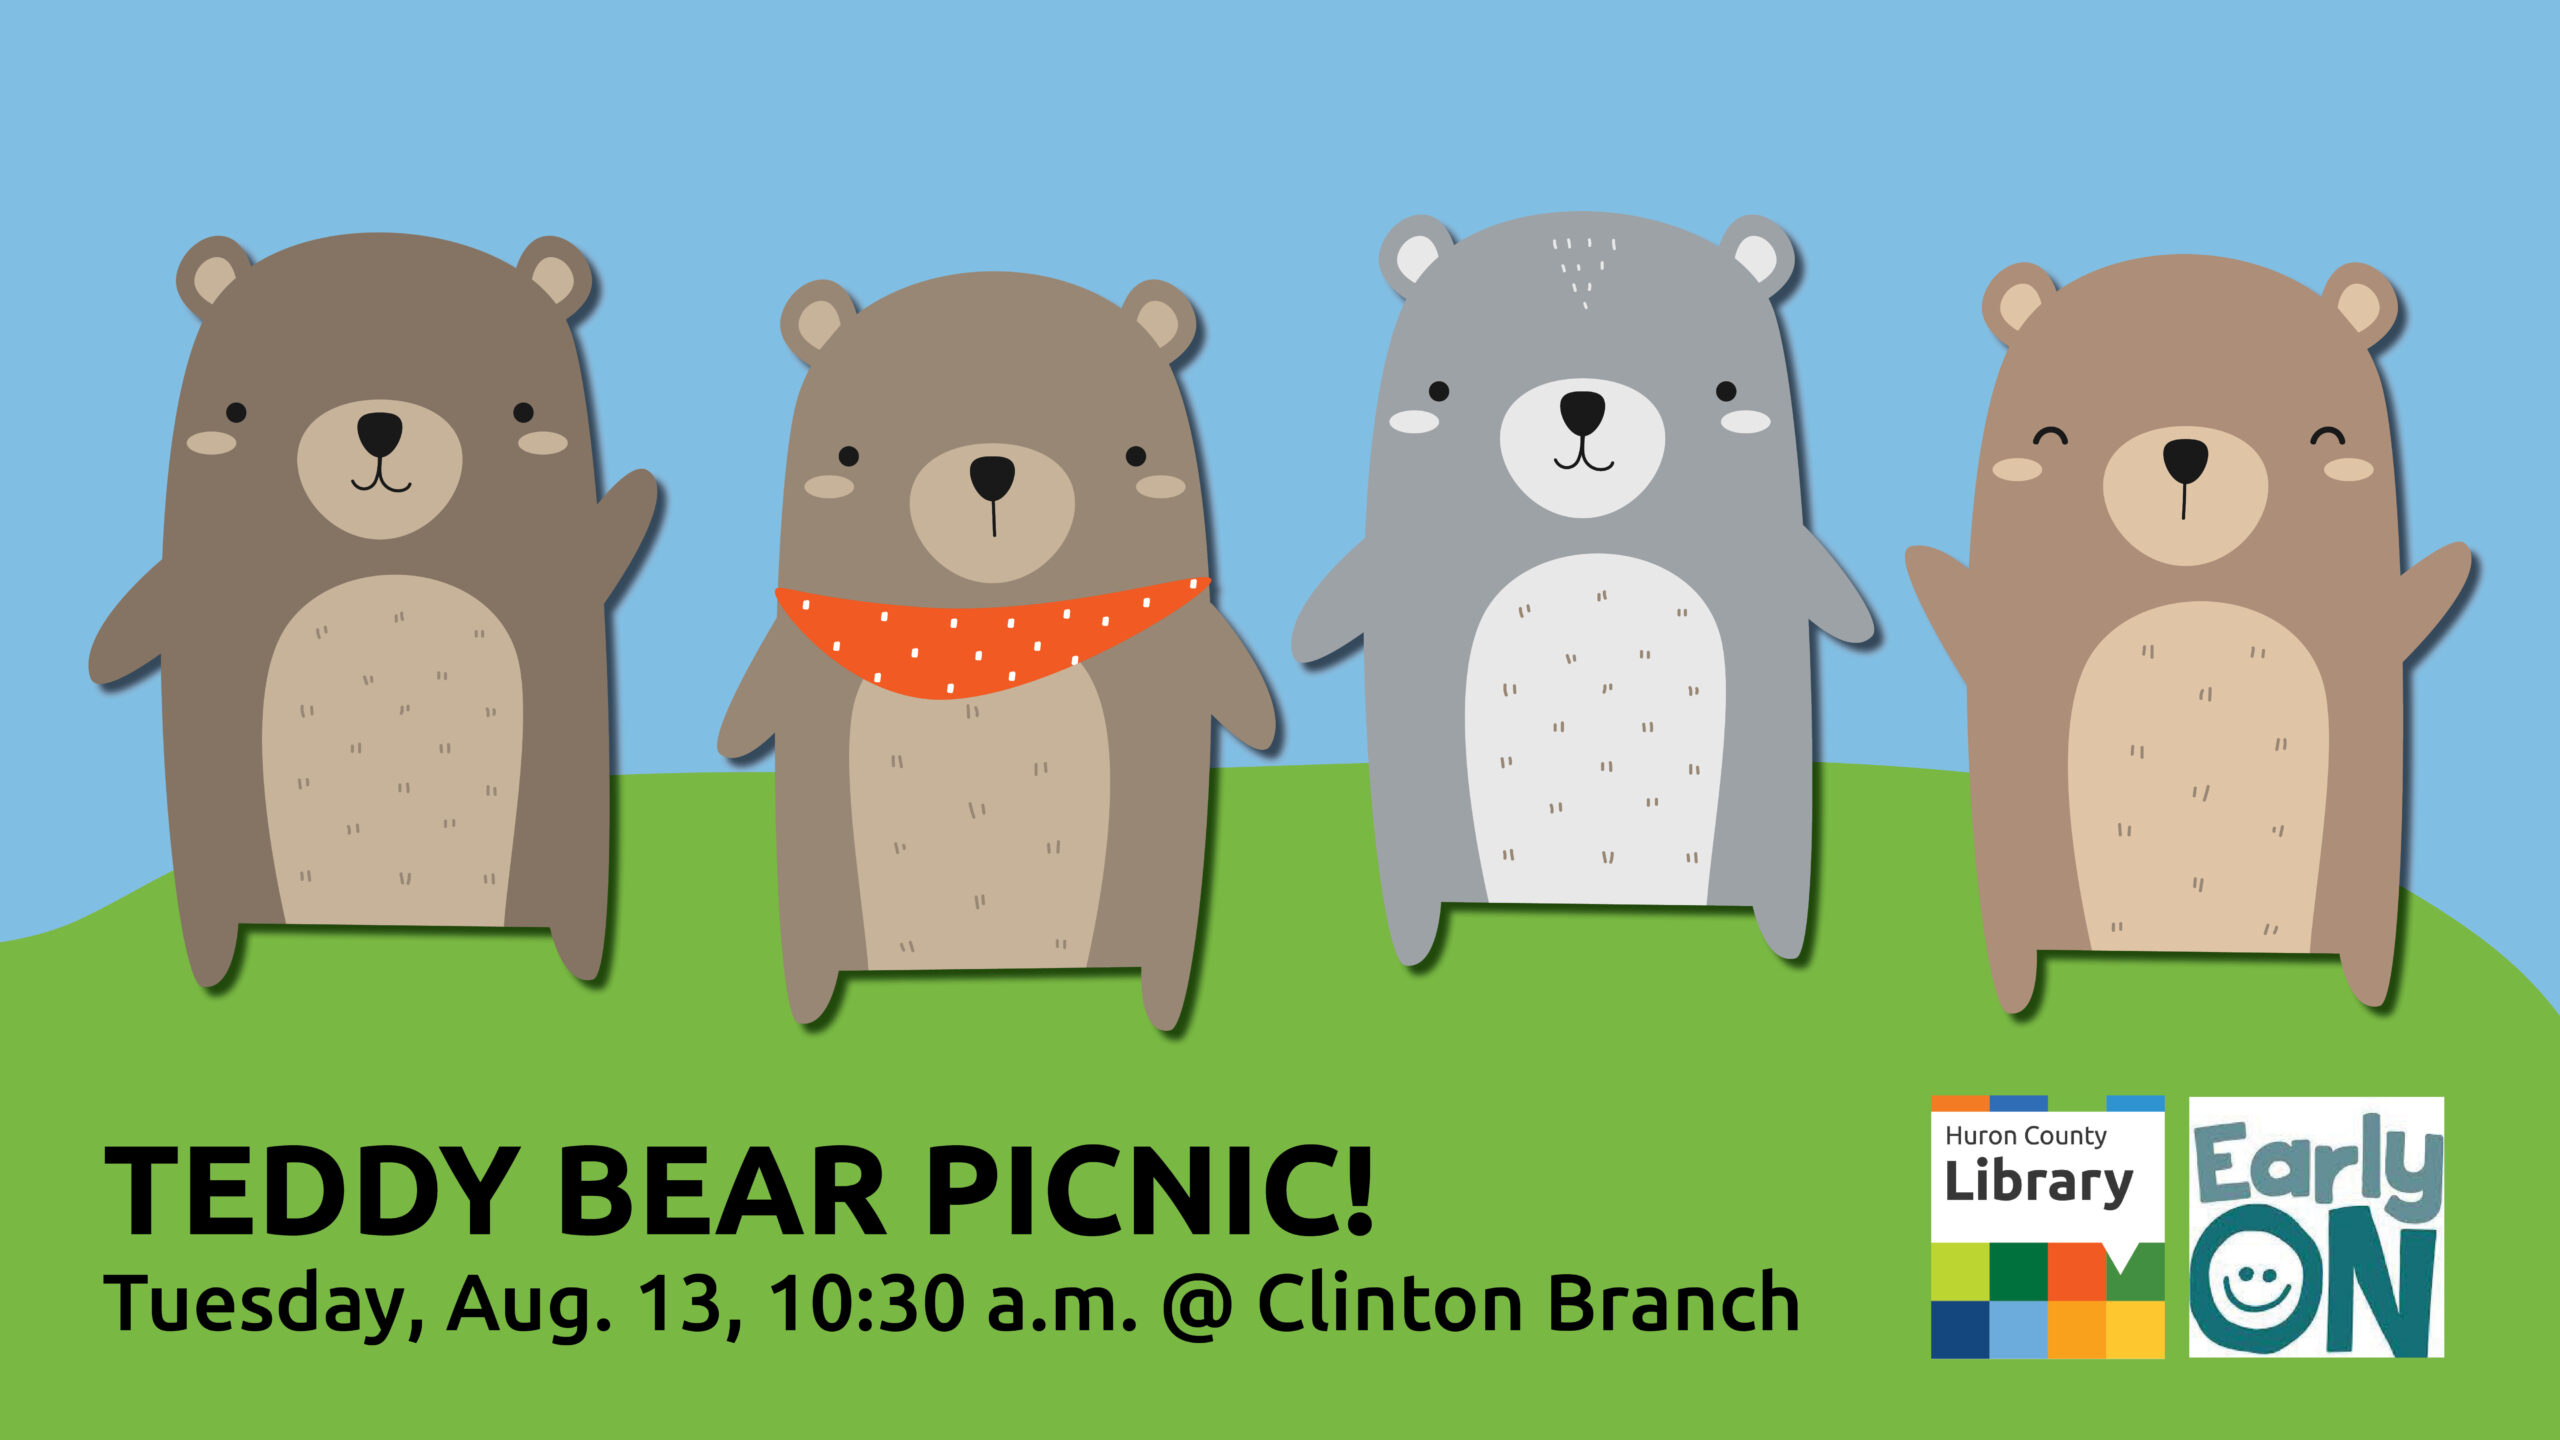 Illustration of teddy bears with text promoting Teddy Bear Picnic at Clinton